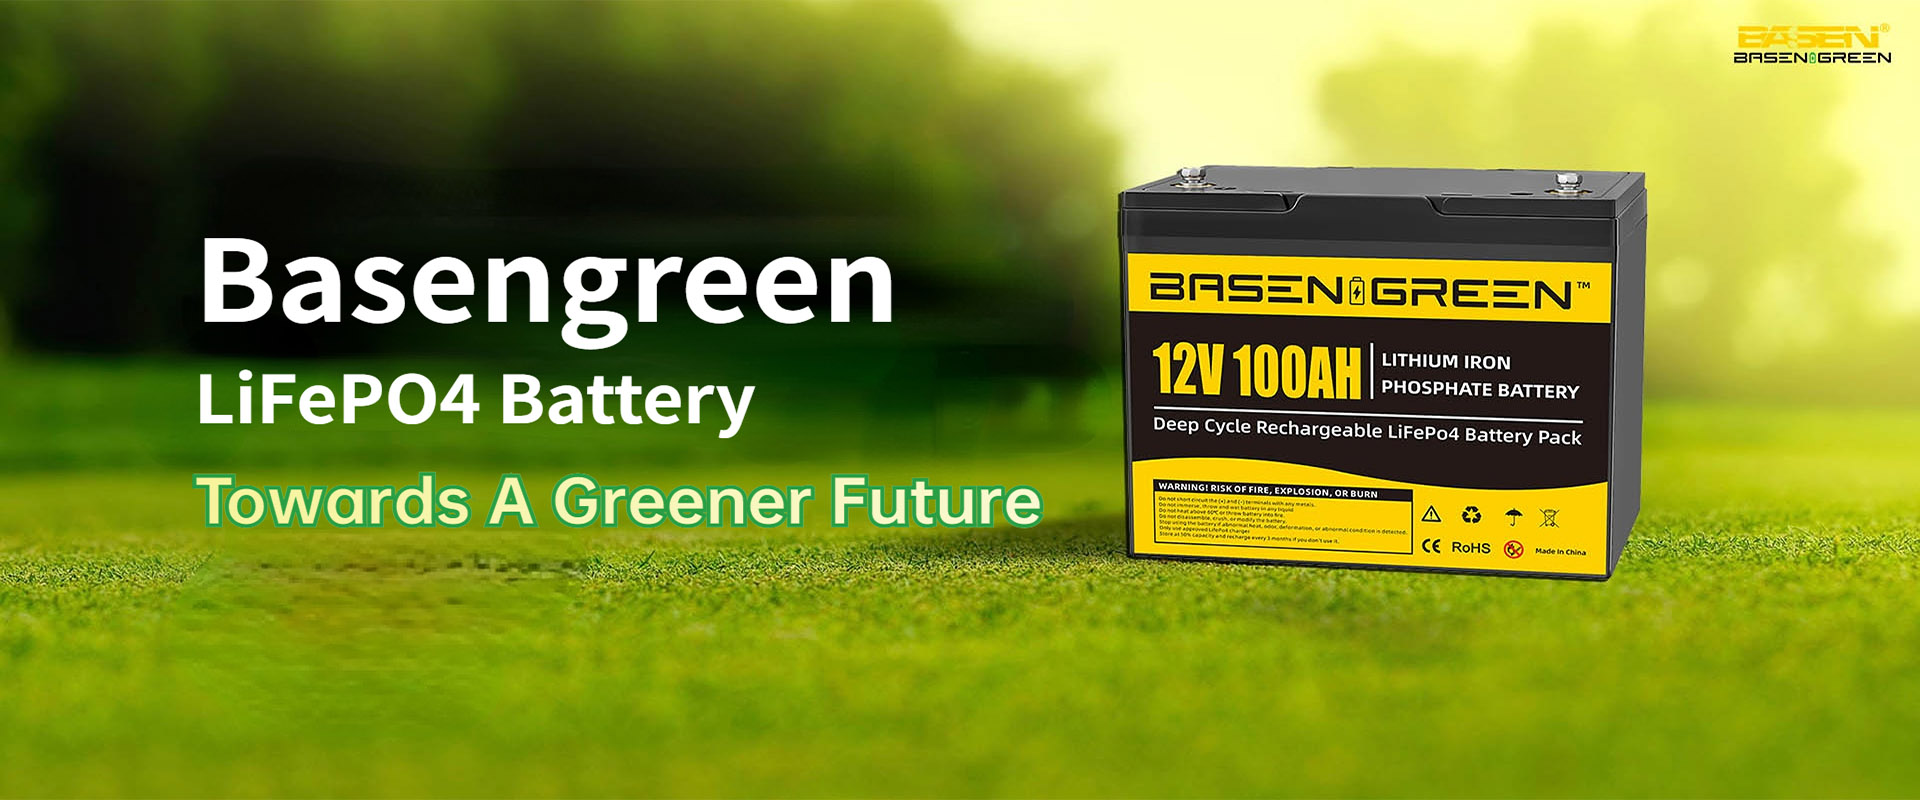 What Are The Benefits Of Lithium Iron Phosphate Batteries?